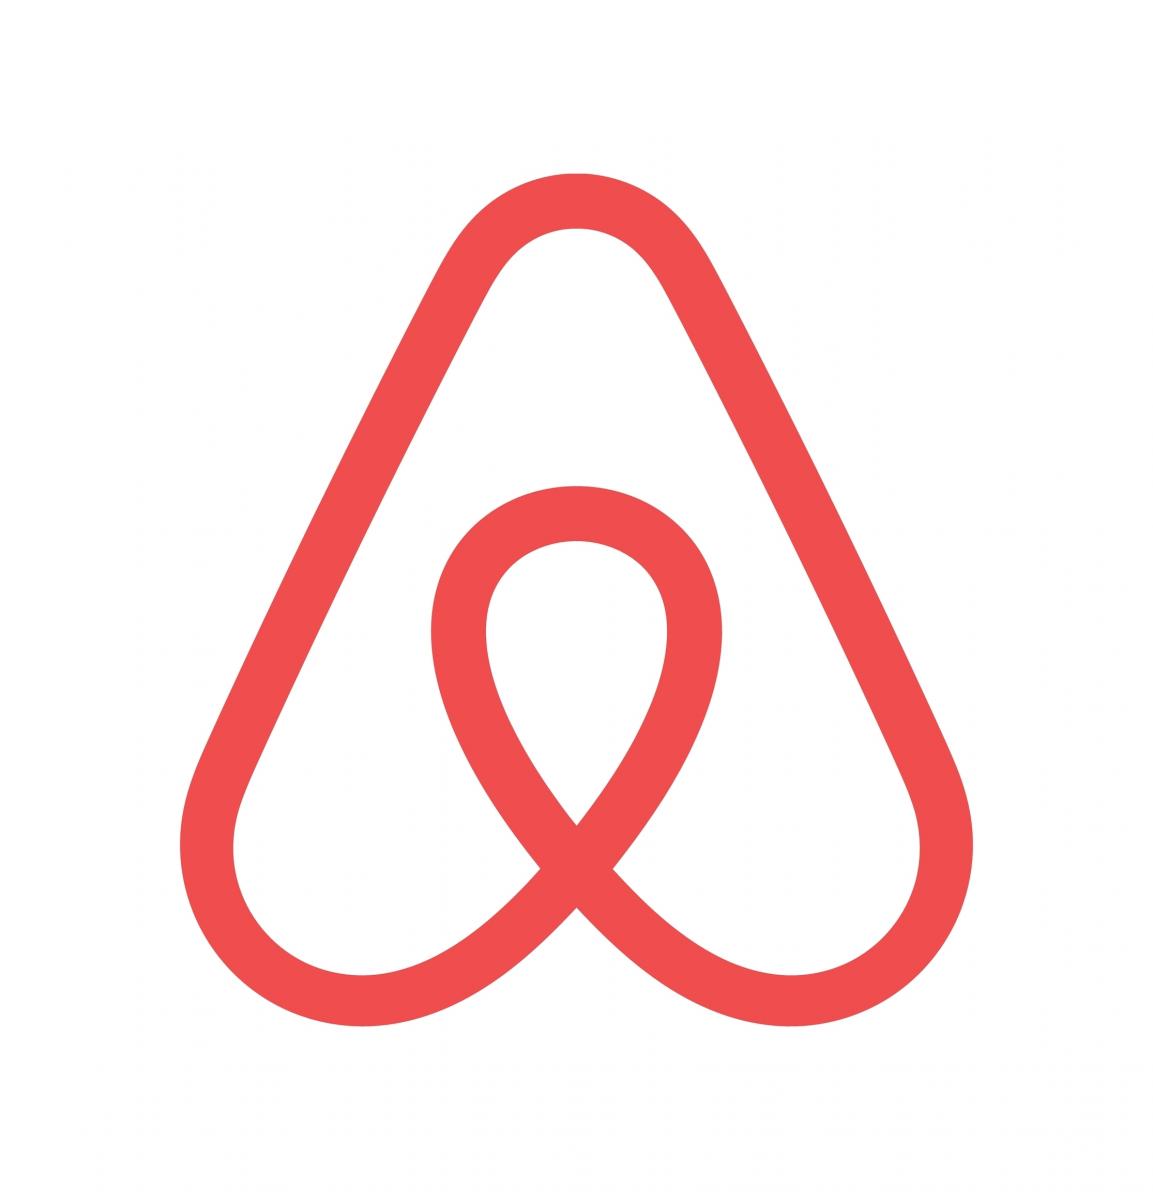 Airbnb Regulation - Last-ditch bid to stop “laughing stock” rules